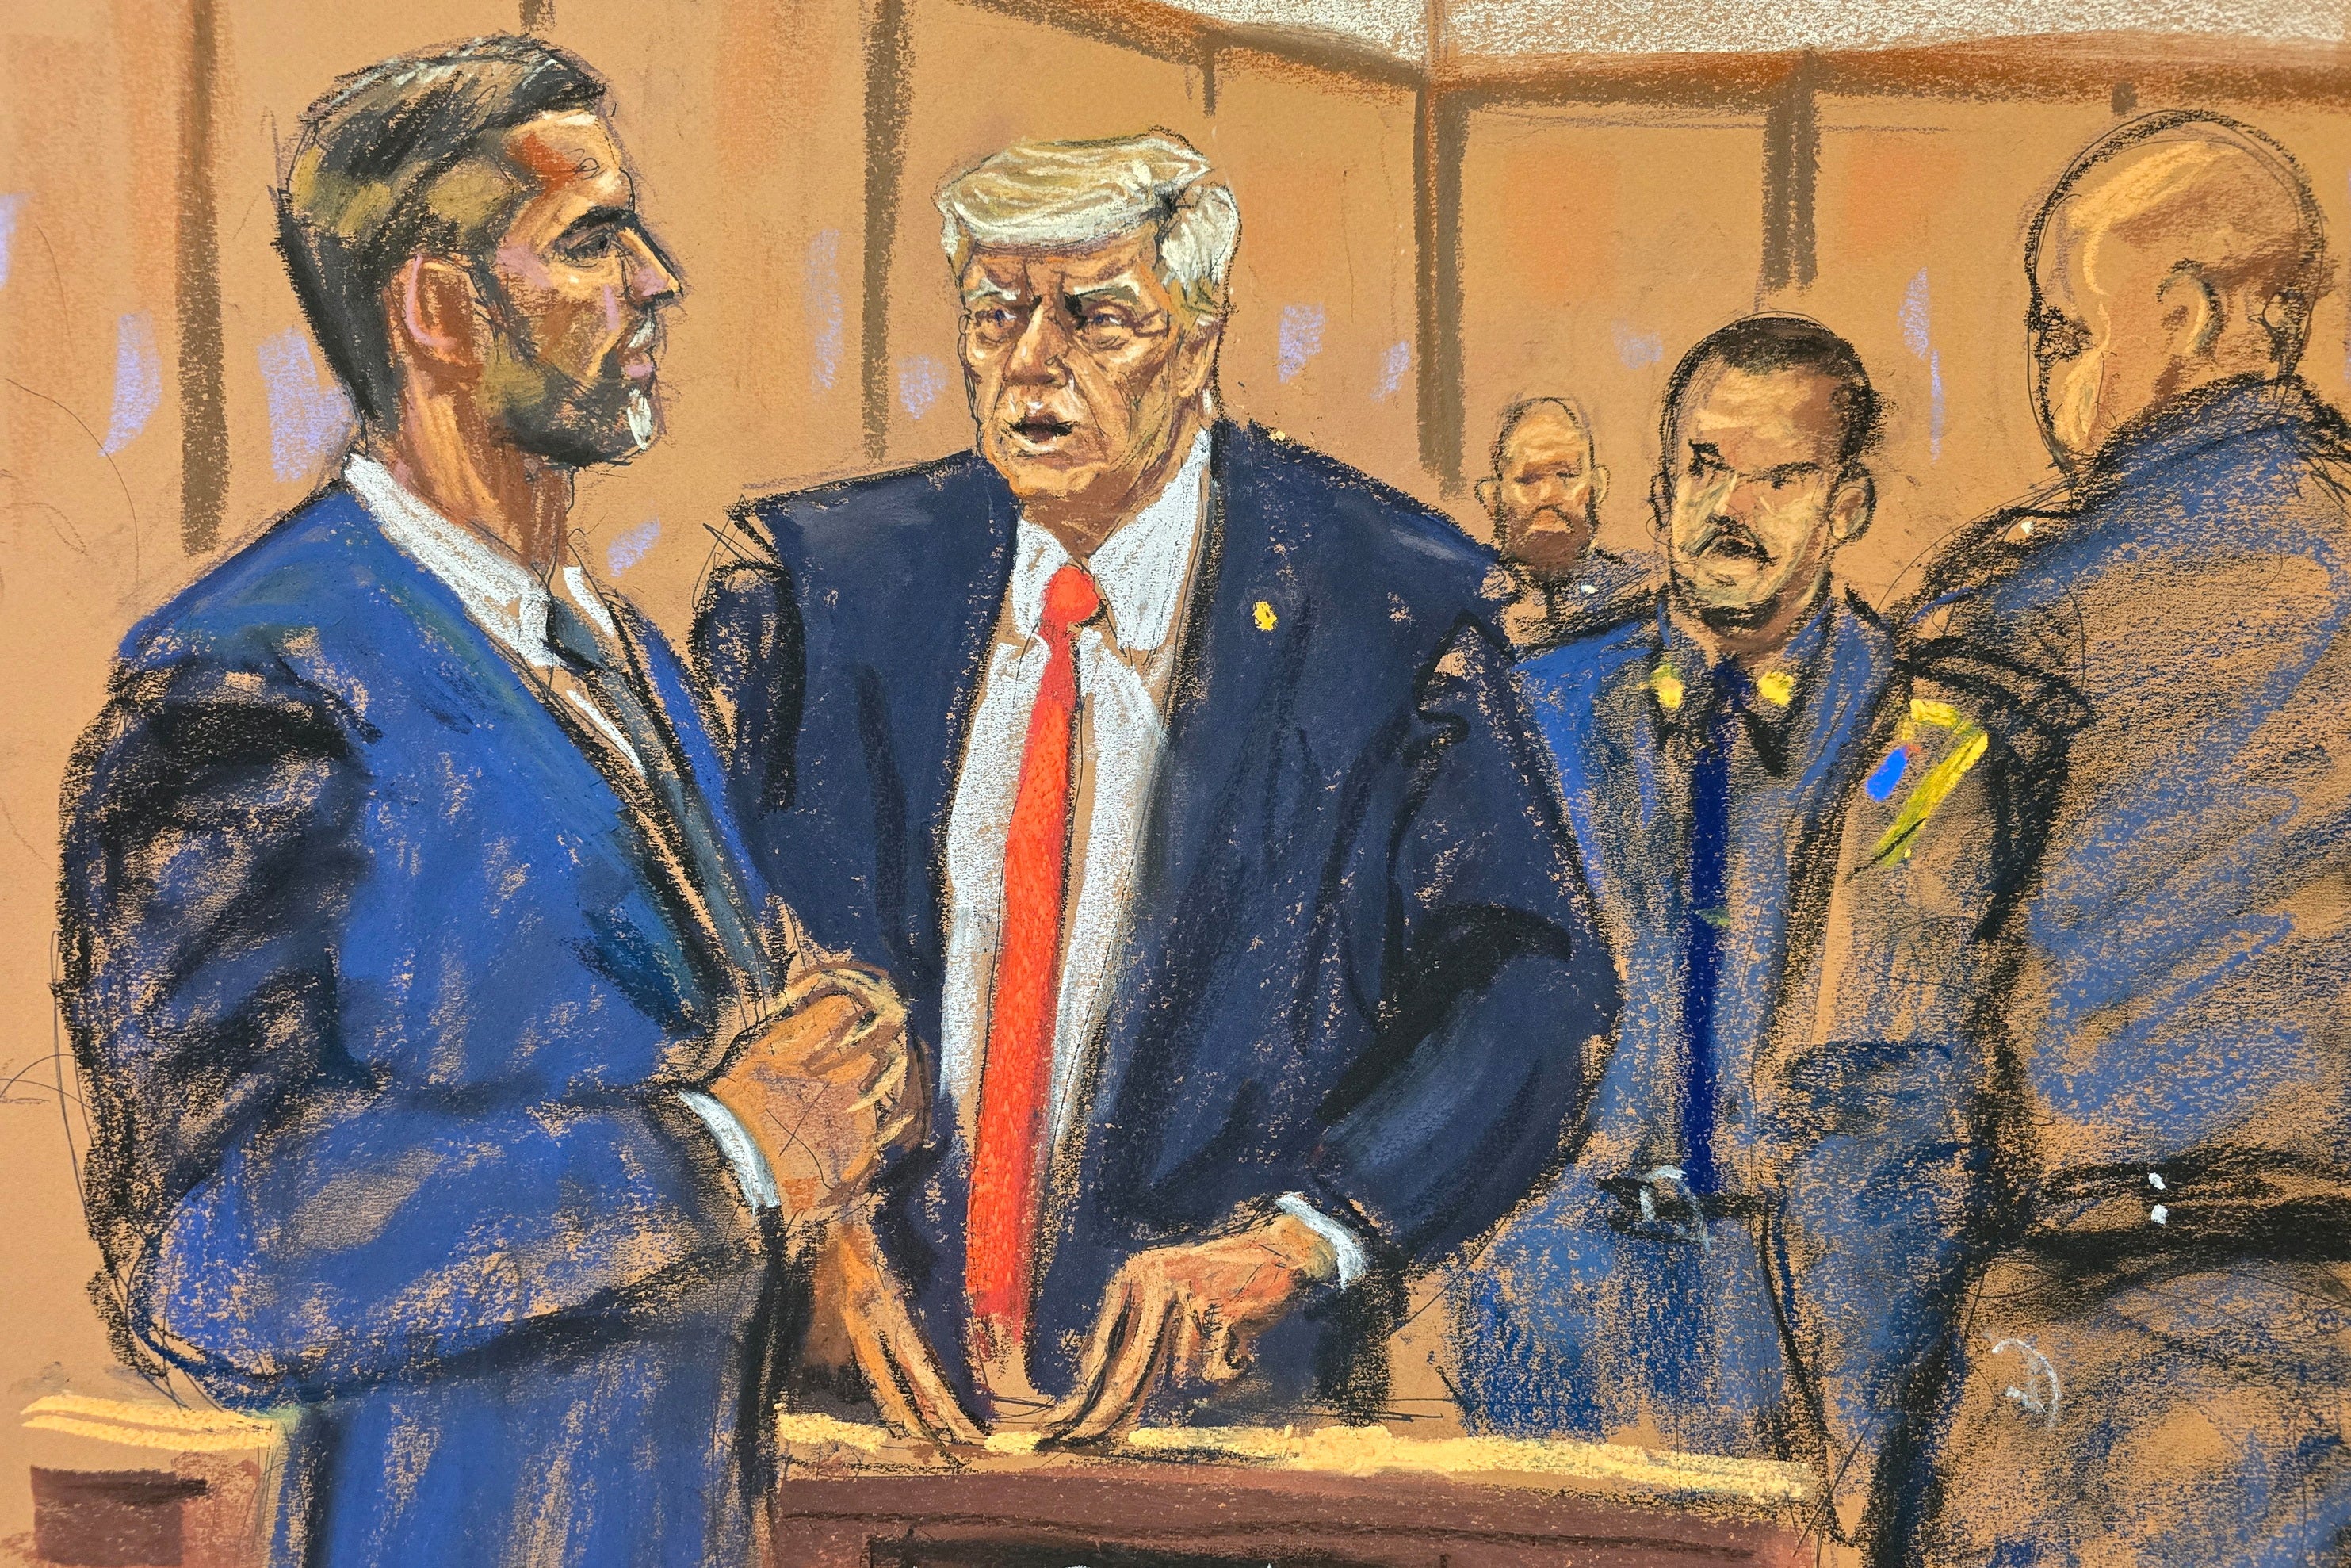 trump trial live: bombshell texts show tabloid editor calling stormy daniels story ‘final nail in the coffin’